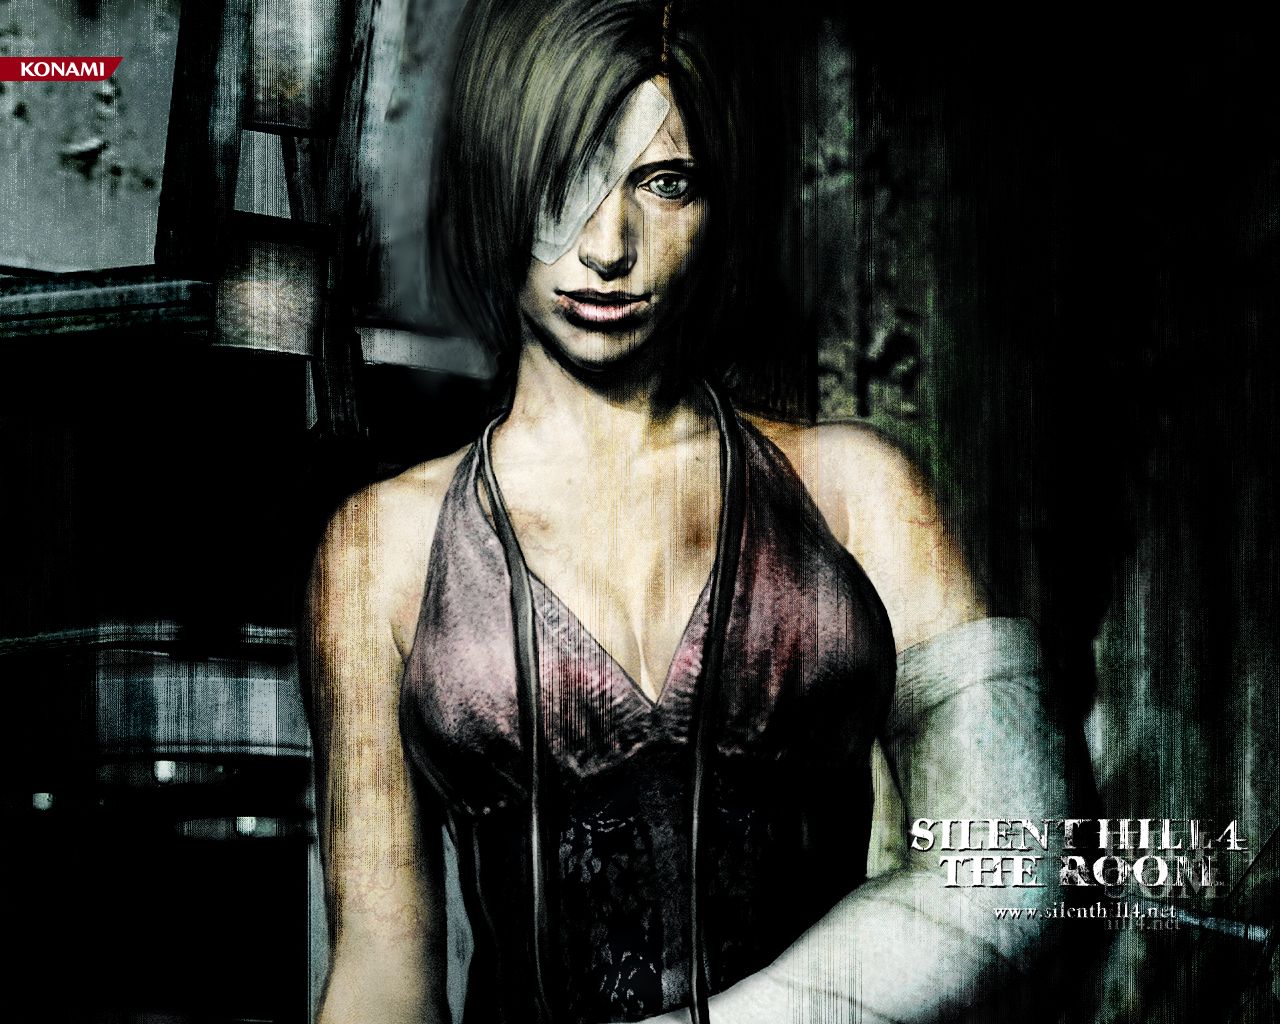 Video Game Silent Hill 4 The Room Wallpaper:1280x1024